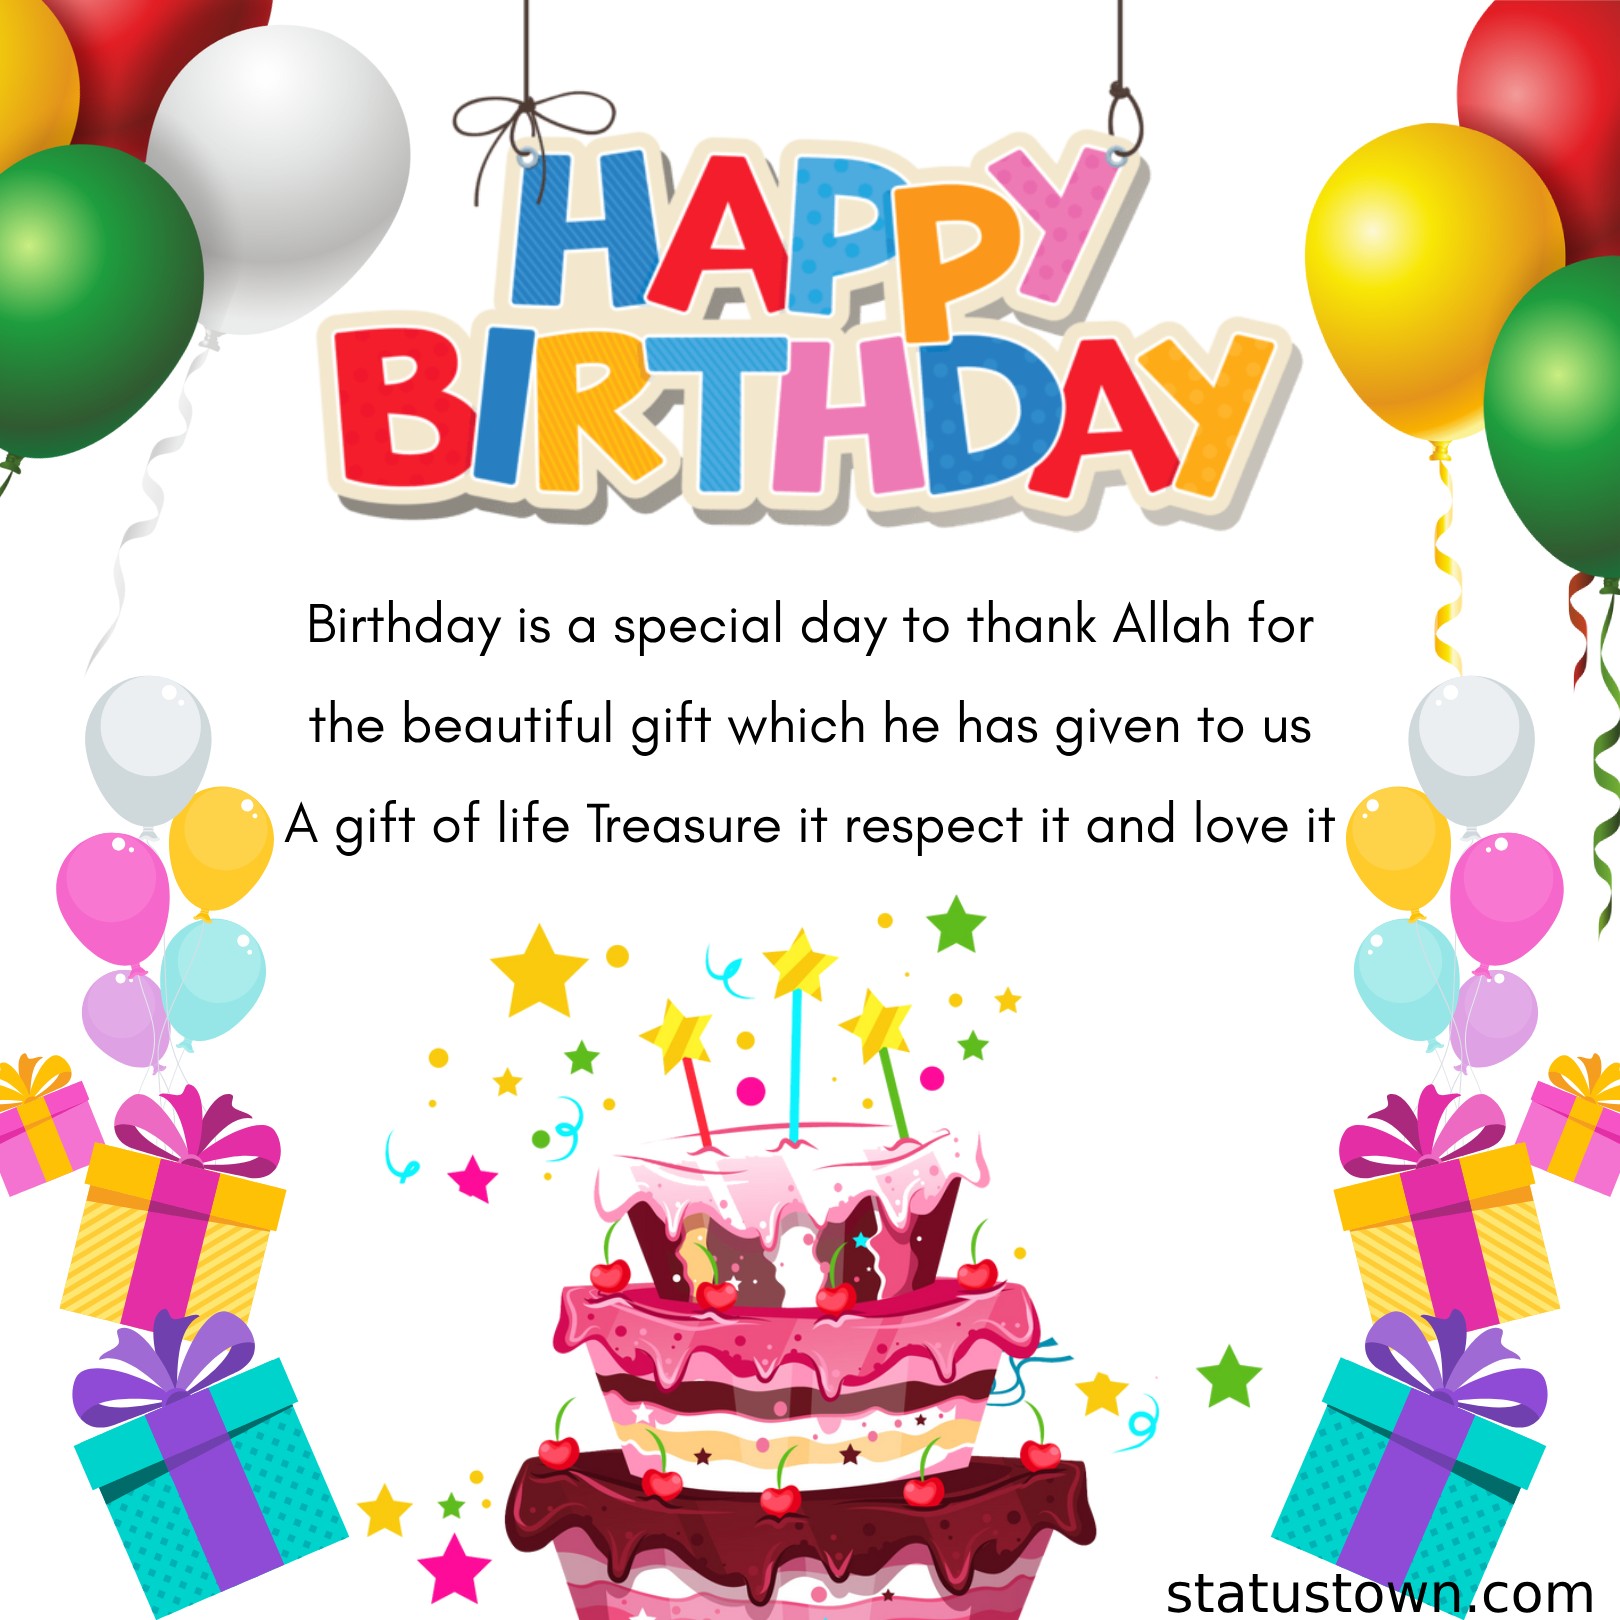 Birthday is a special day to thank Allah for the beautiful gift which he has given to us… A gift of life! Treasure it, respect it and love it. Happy birthday! - Islamic Birthday Wishes